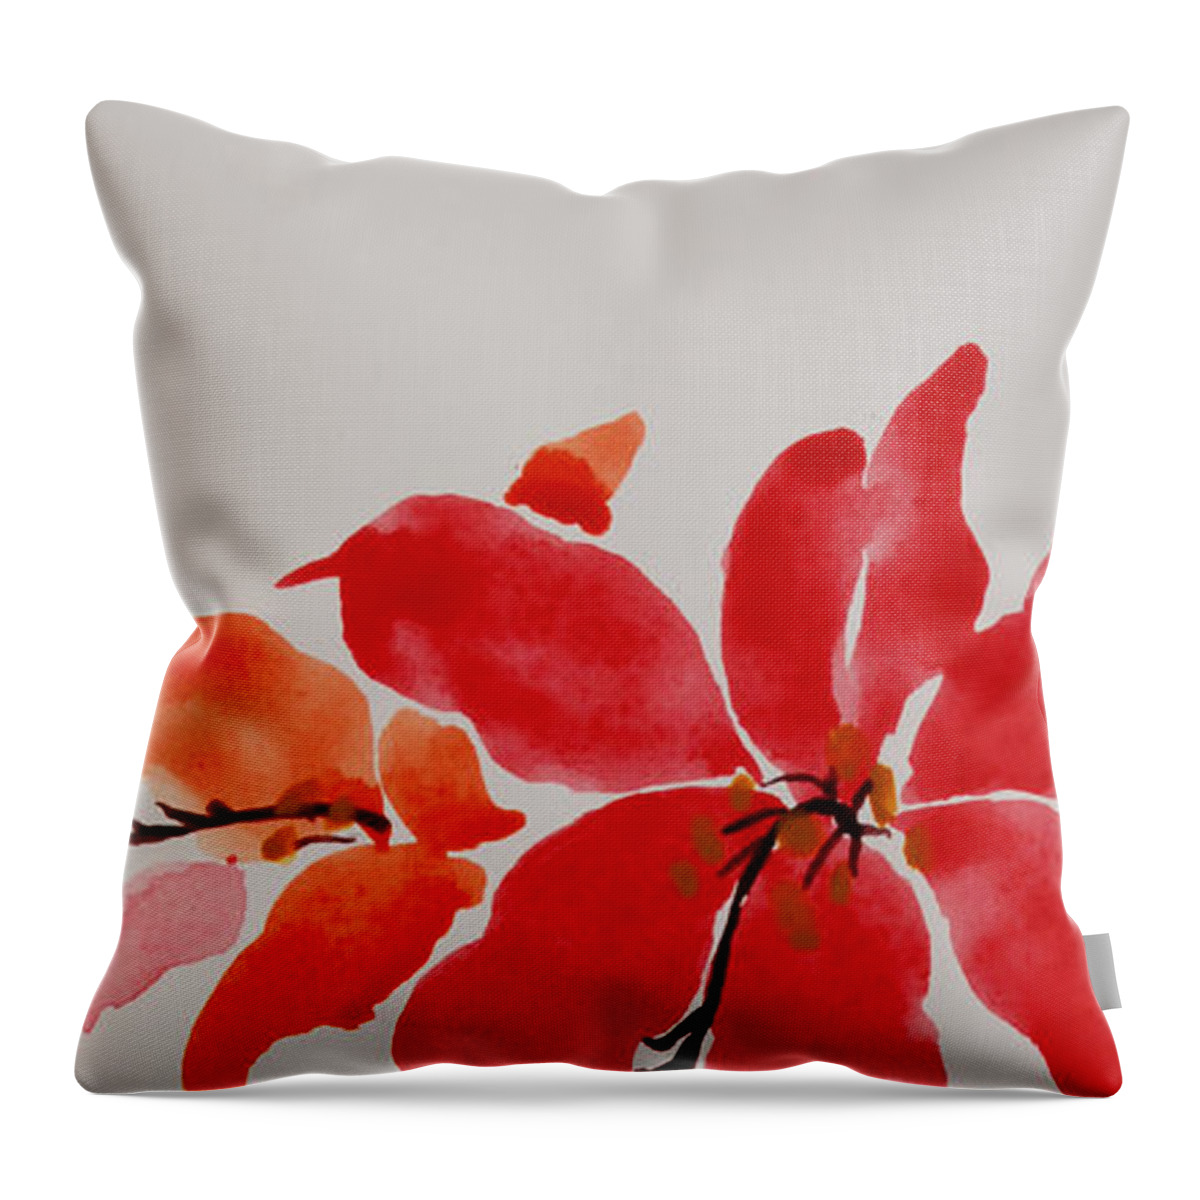 Floral Throw Pillow featuring the painting Amaryllis II by Heidi E Nelson